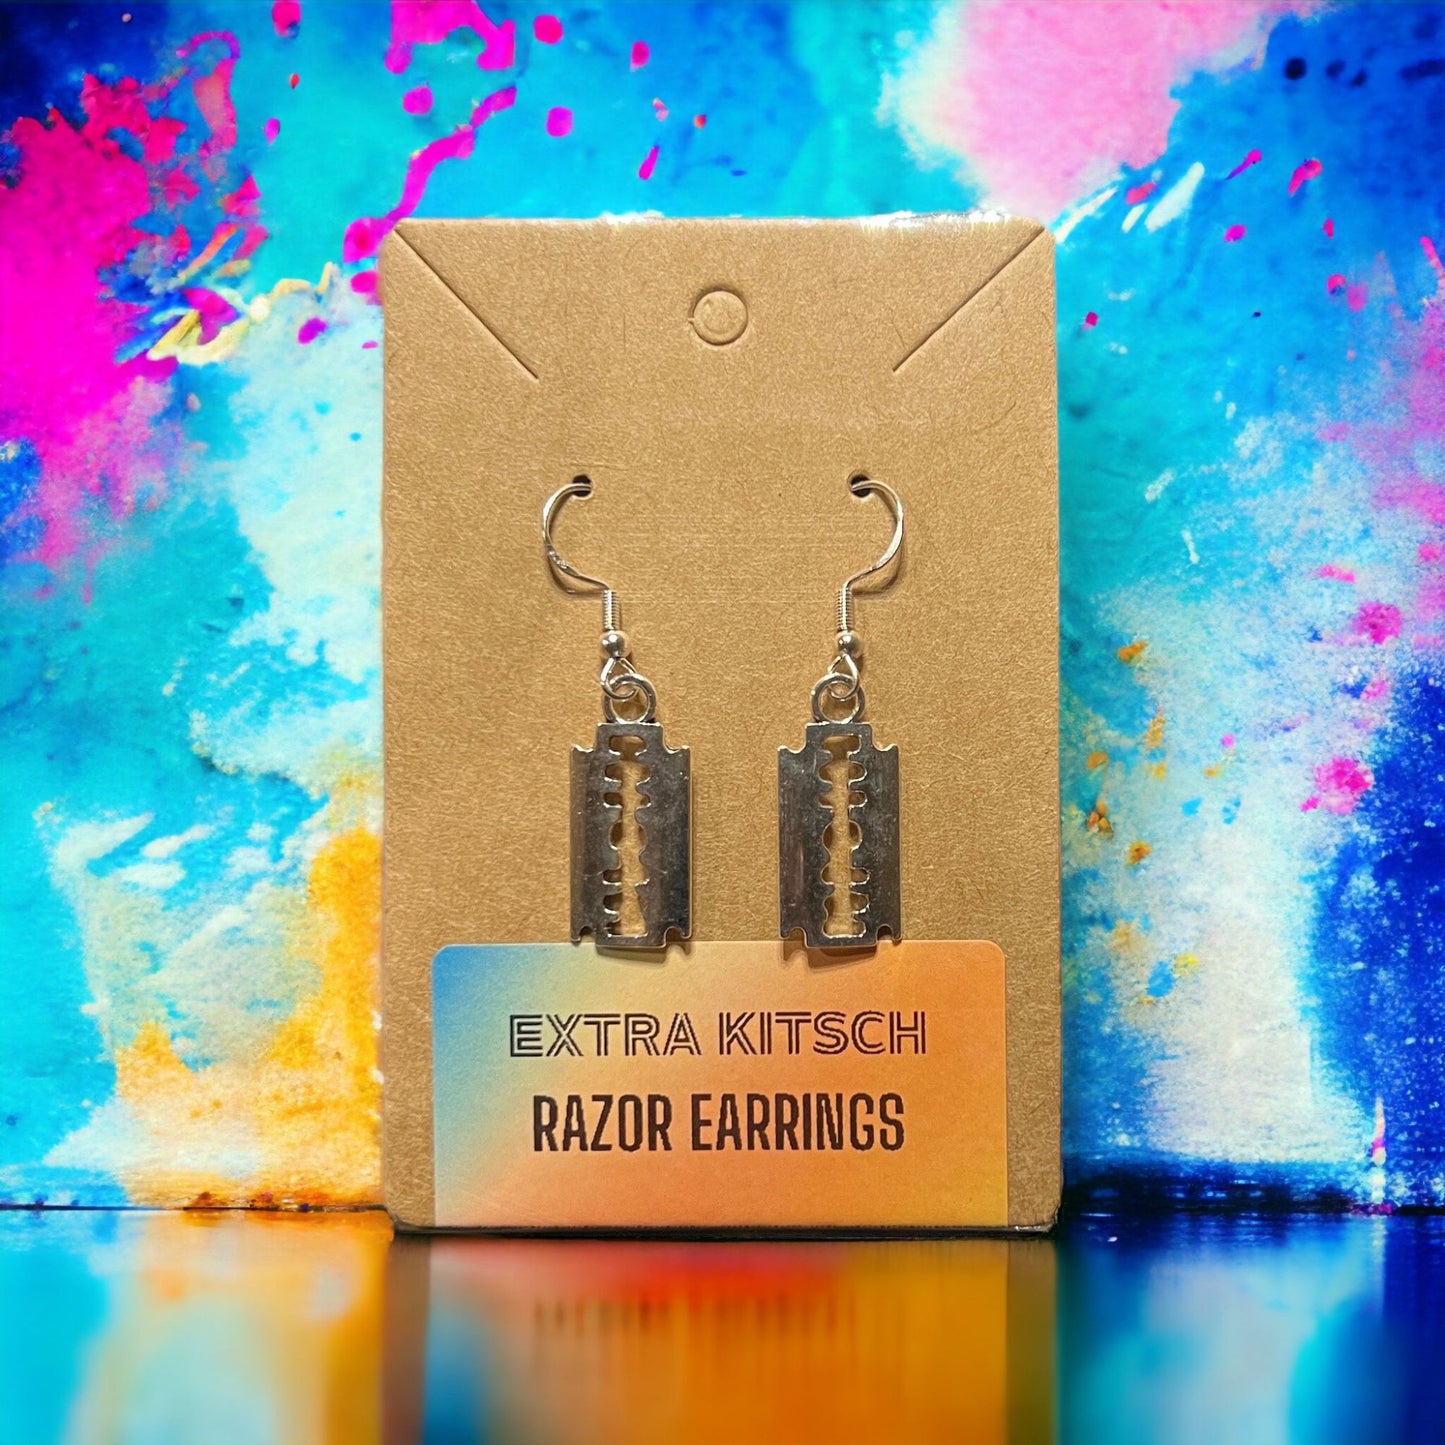 Silver tone razor blade charm earrings, inspired by punk and goth fashion. Displayed on the Extra Kitsch branded merchandise card. Makes it perfect for gift giving.